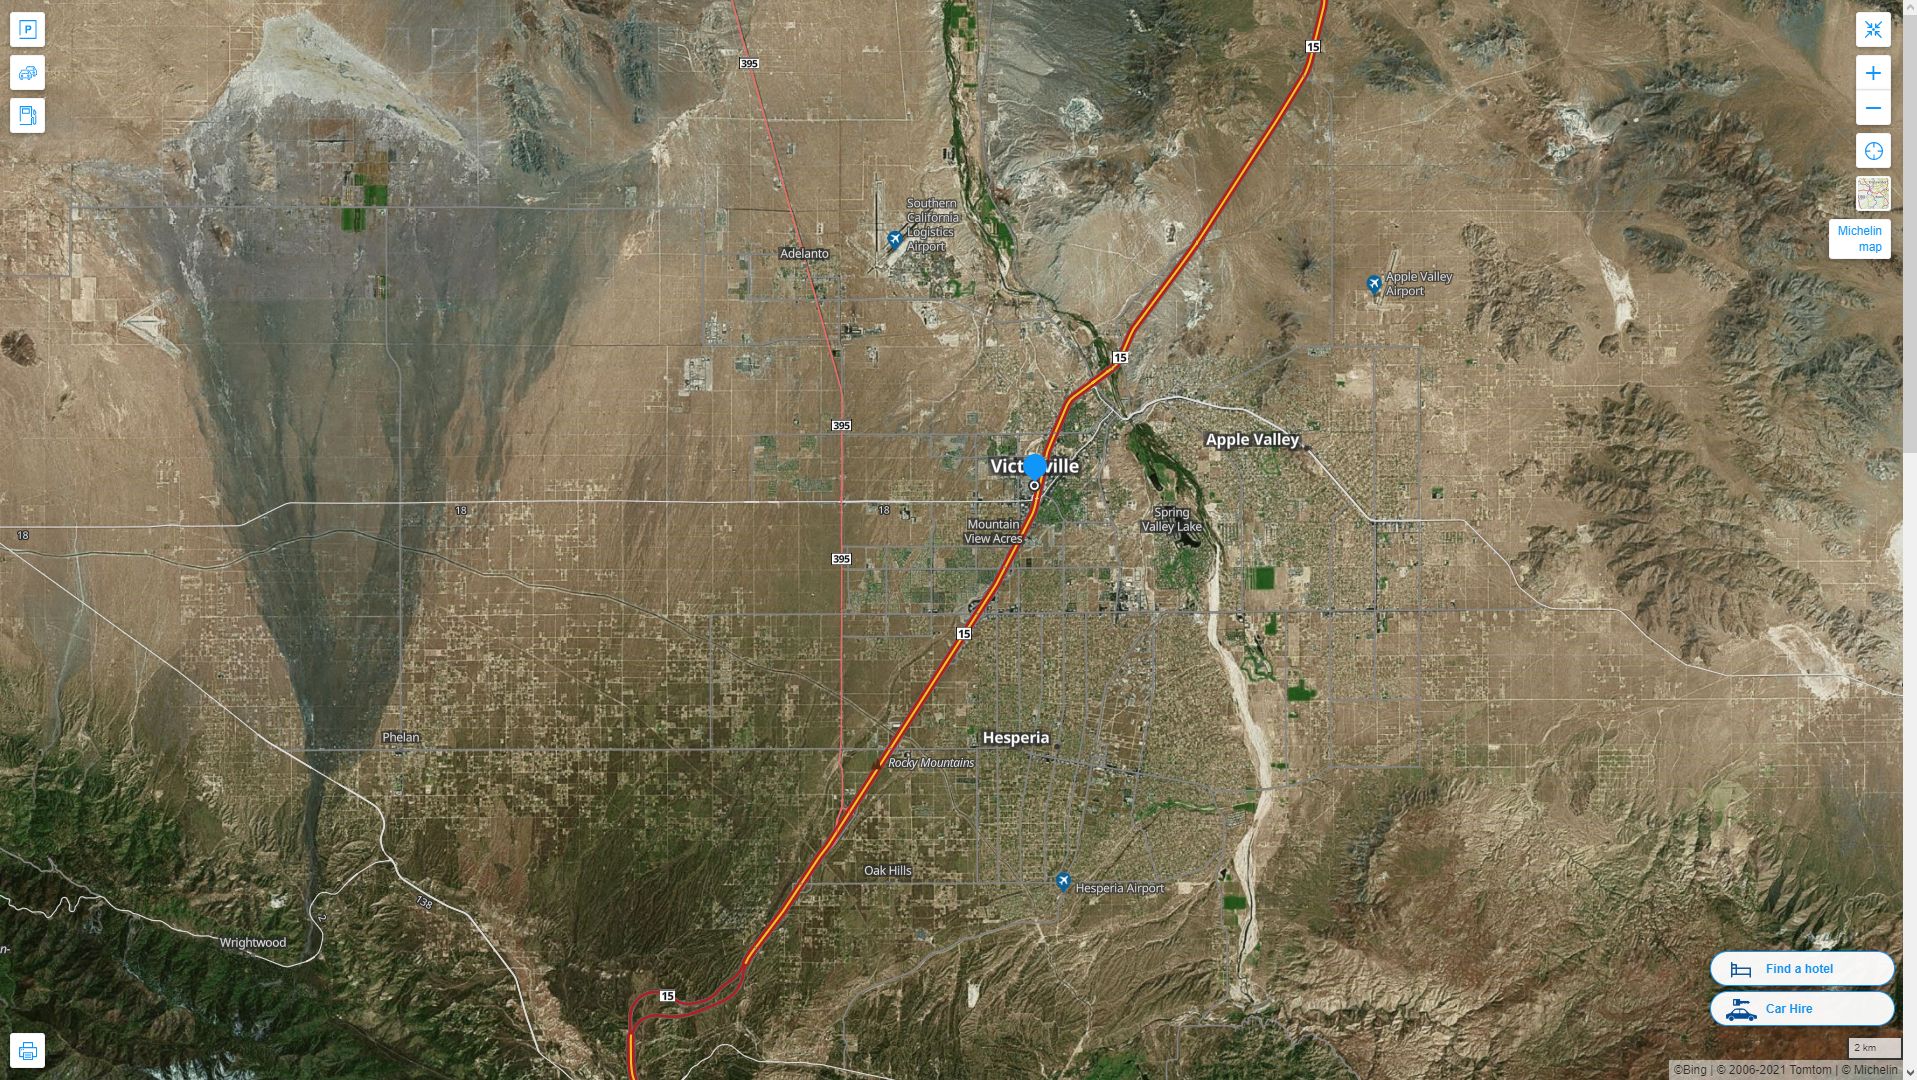 Victorville California Highway and Road Map with Satellite View